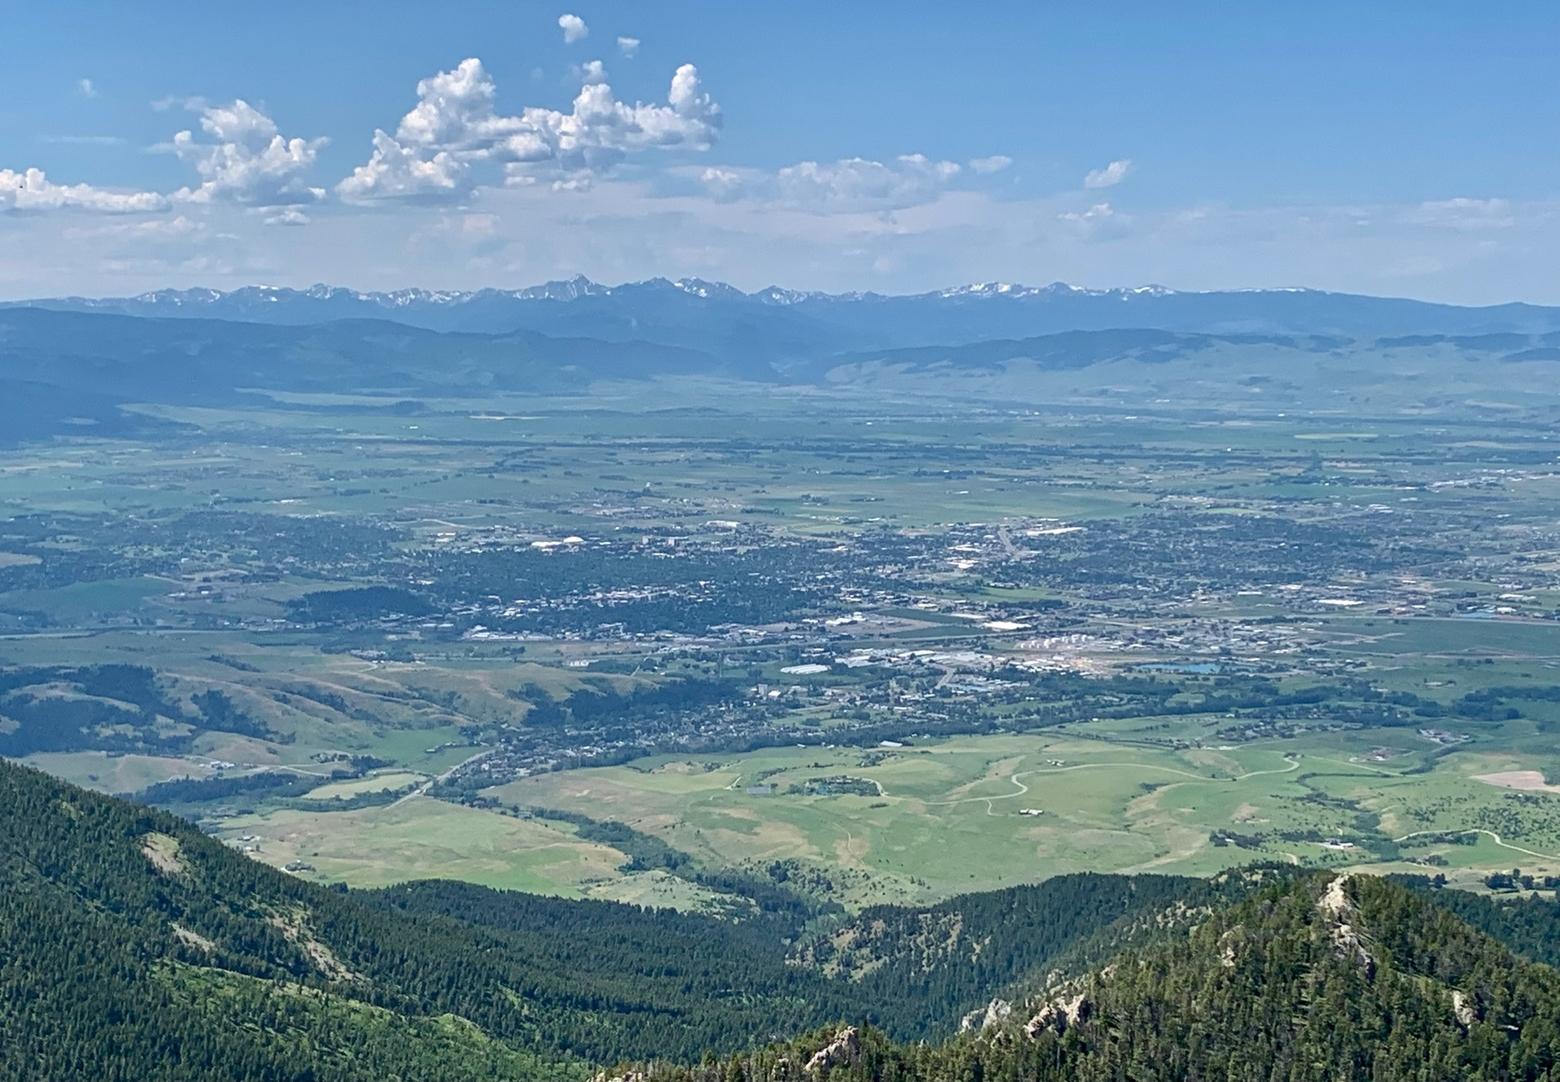 This view of Bozeman taken from the Bridger Mountains shows the city with tendrils of development extending out across the Gallatin Valley. All but weedy species of wildlife have been displaced from the urban and suburban footprint. Will the city of Bozeman's "Gallatin Sensitive Lands Study" make an appreciable difference in getting habitat protected at the edge of the mountains crucial for so many species?  Photo by Todd Wilkinson